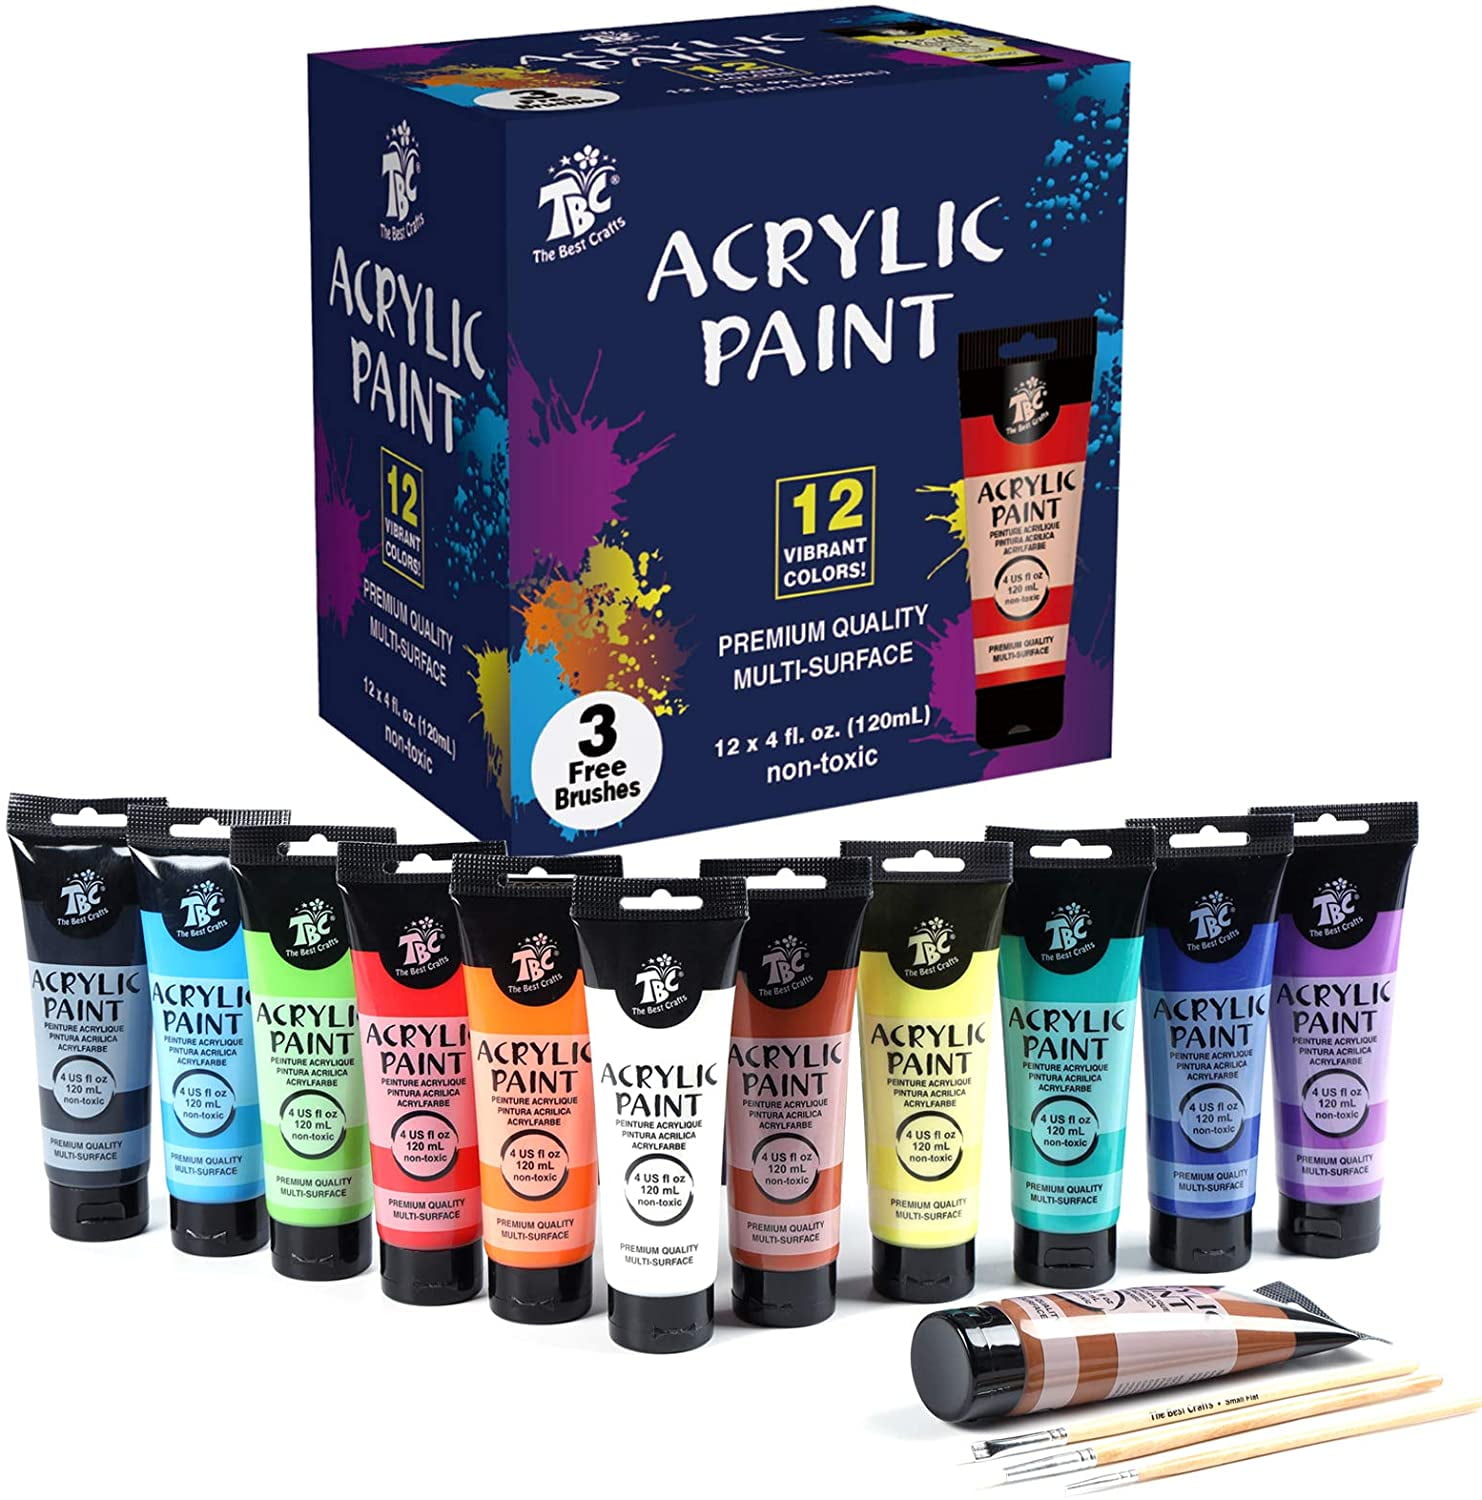 TBC The Best Crafts Premium Acrylic Paint,12 Colors/Big Tubes(120ml / 4 fl.oz,Rich Pigments,Ideal Art Paint Supplies for Professional and Beginners